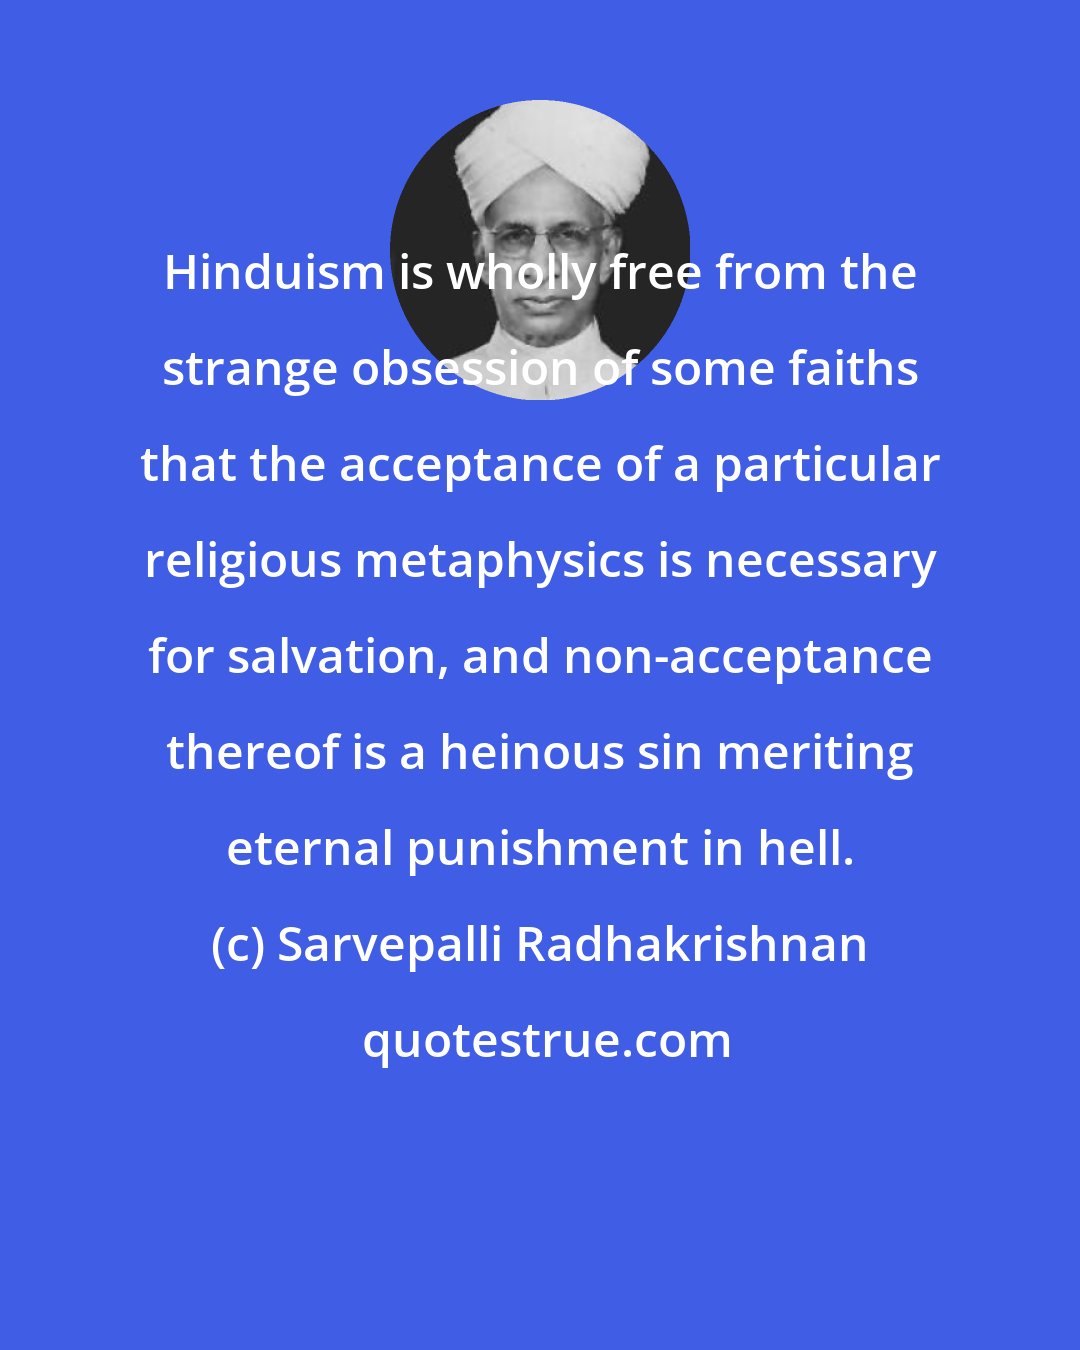 Sarvepalli Radhakrishnan: Hinduism is wholly free from the strange obsession of some faiths that the acceptance of a particular religious metaphysics is necessary for salvation, and non-acceptance thereof is a heinous sin meriting eternal punishment in hell.